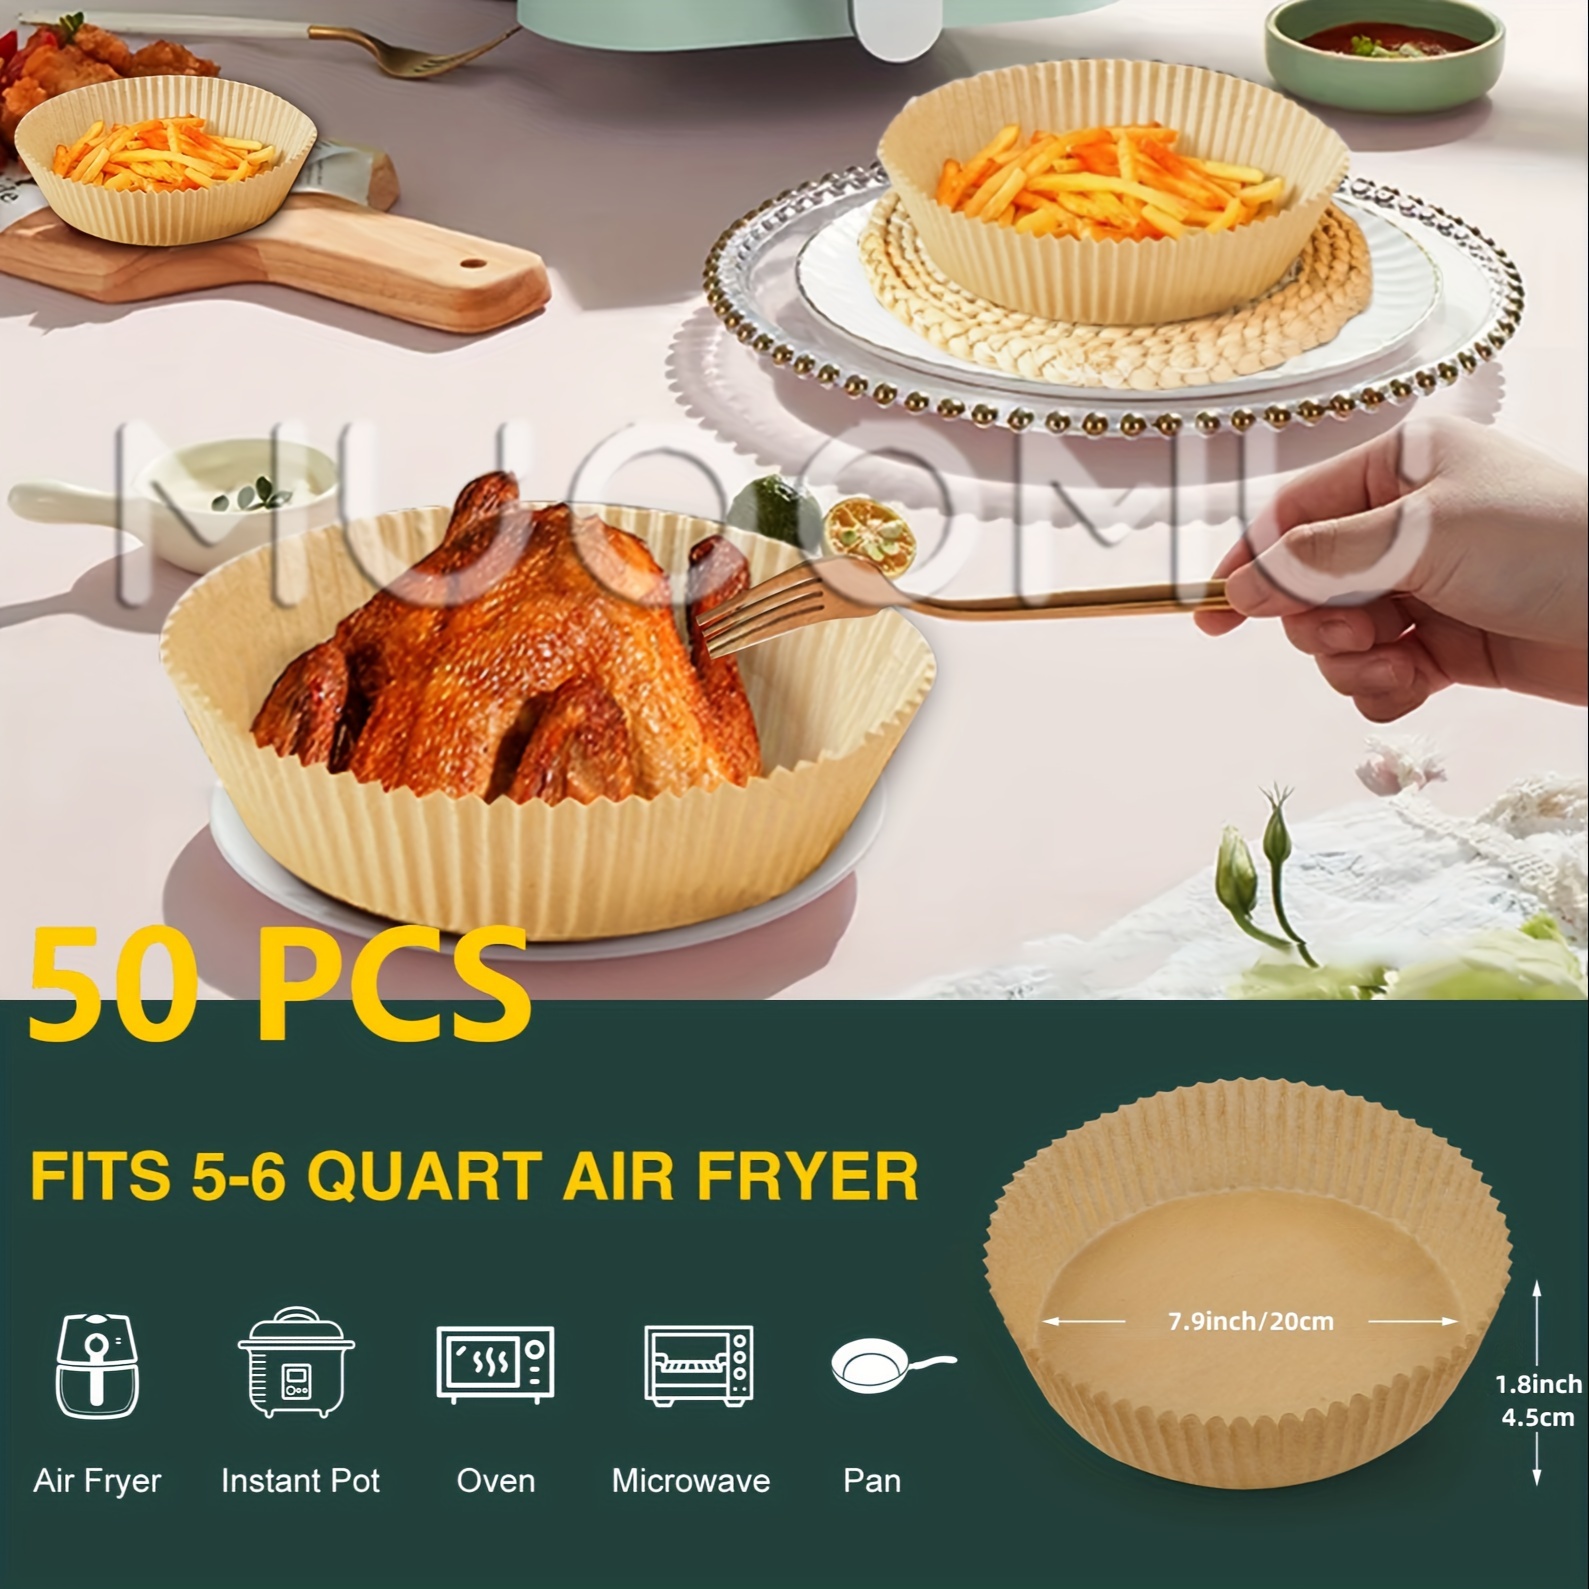 Air Fryer Disposable Paper Liner 9 Inch Air Fryer Liners Non Large-9inch 50  Pcs